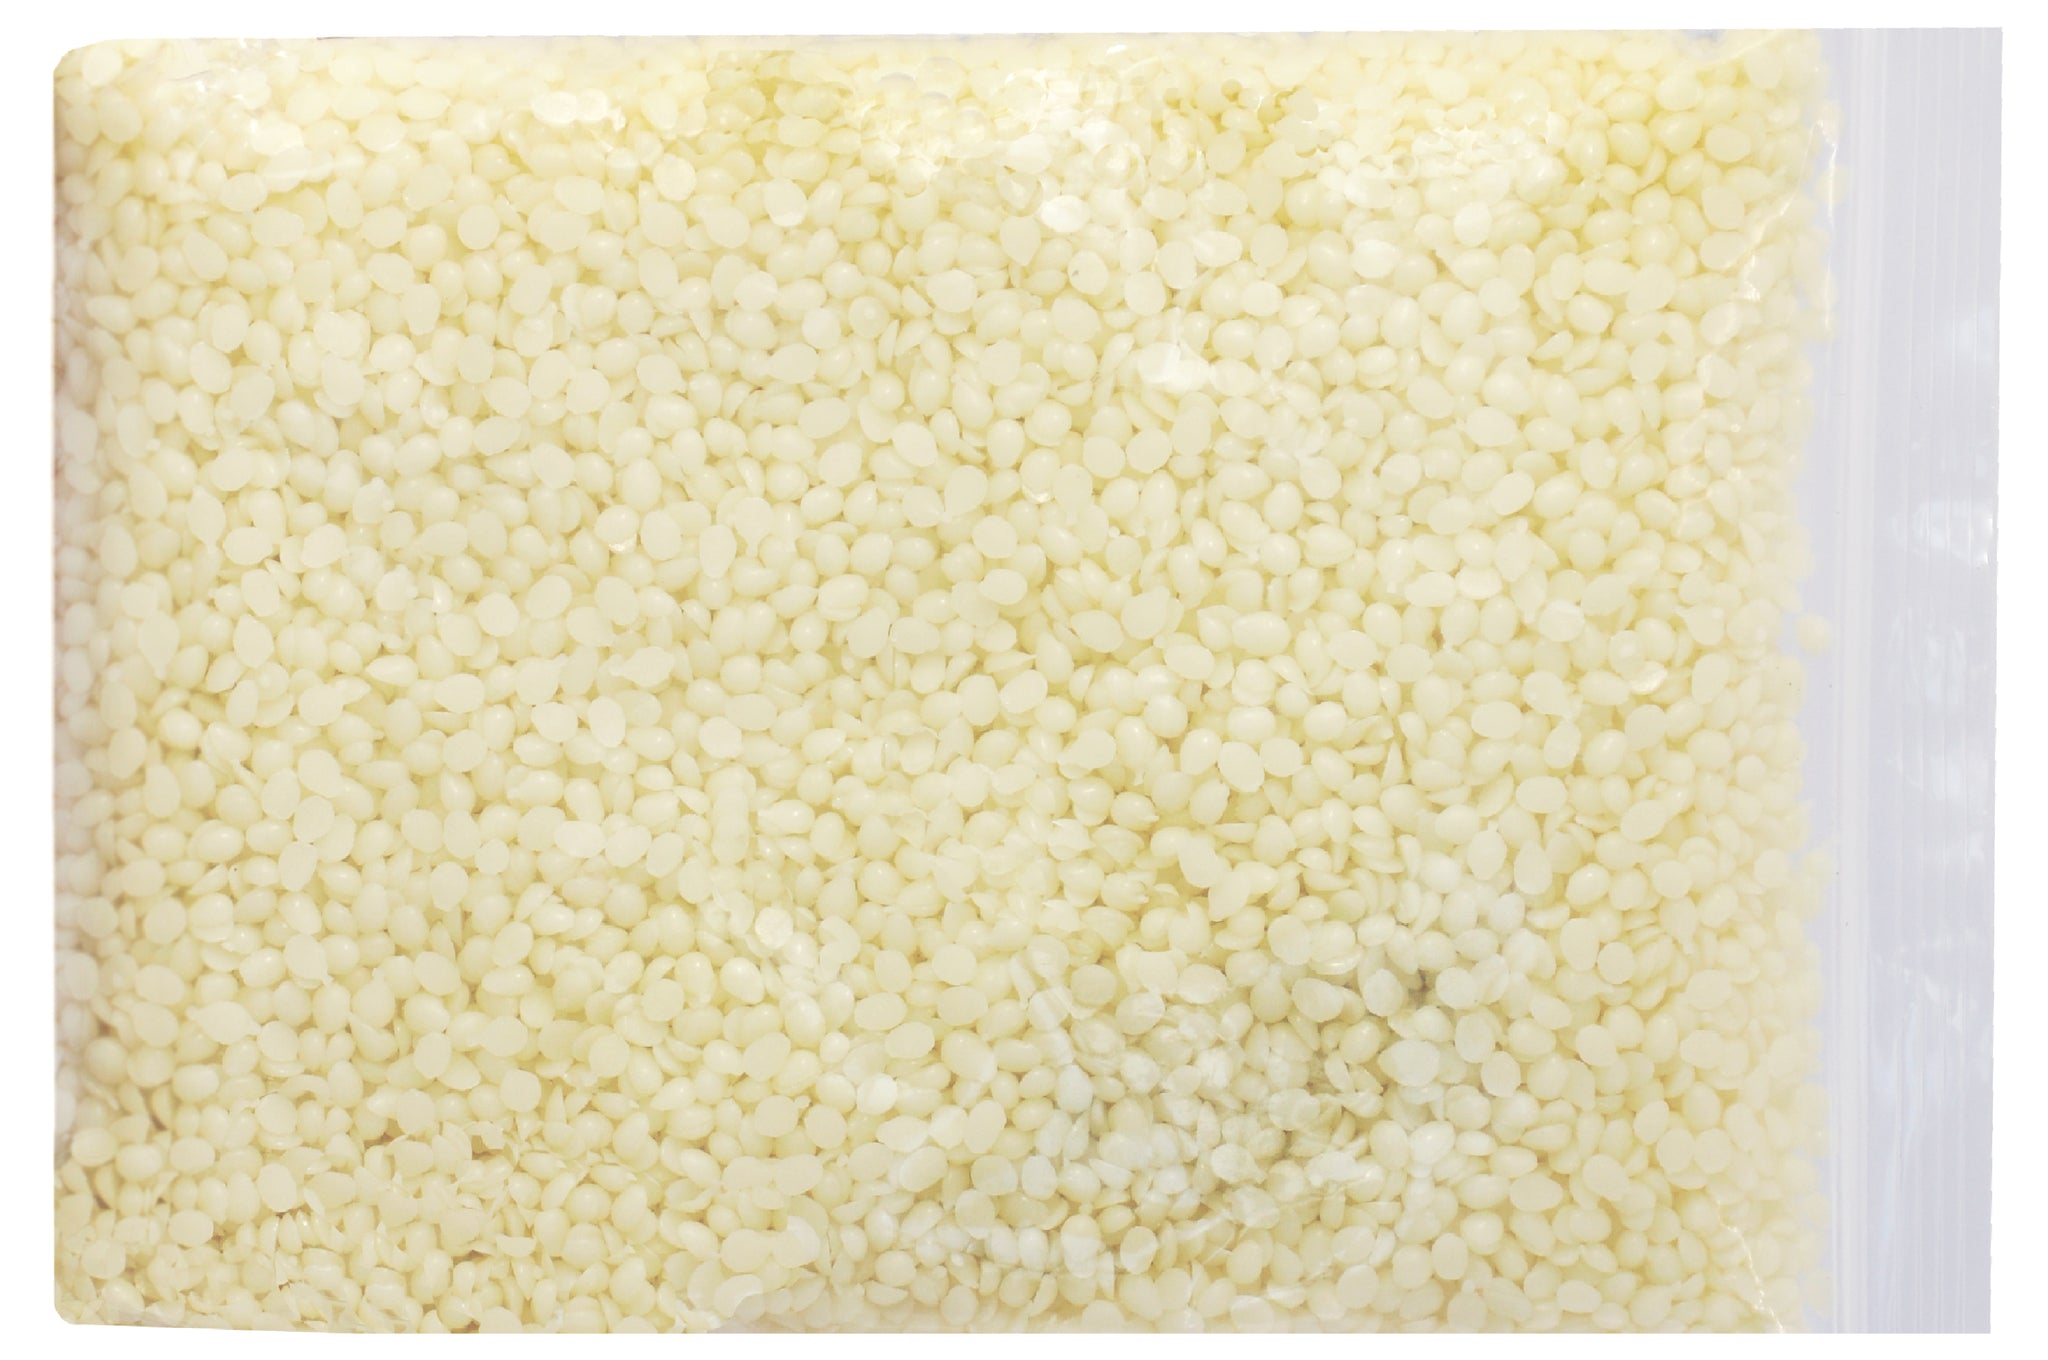 Yellow Beeswax Pellets – AnythingBees